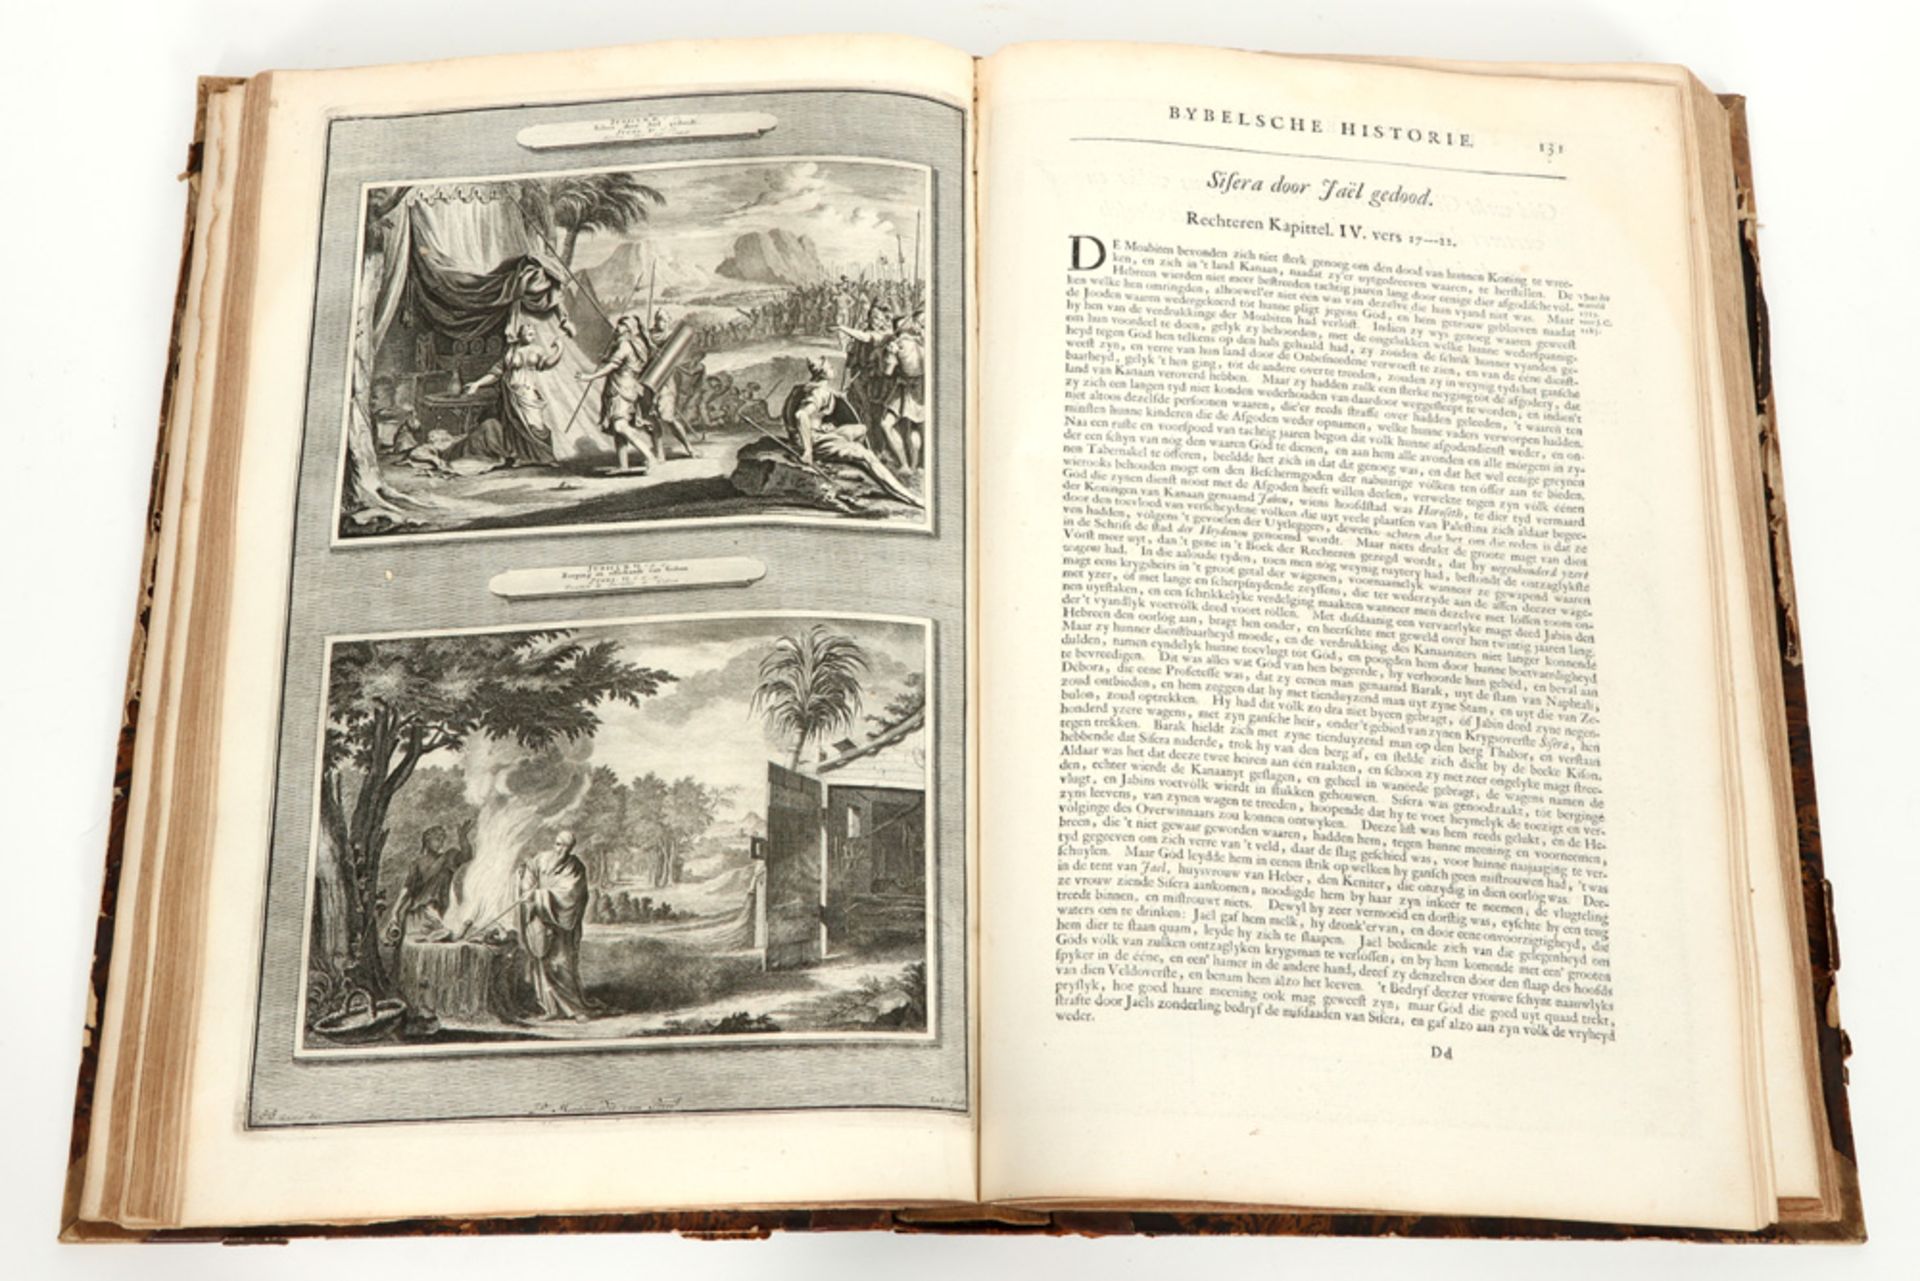 two-part Dutch print bible - the so-called "Mortier" bible - published in 1700 by Pieter Mortier in  - Image 3 of 6